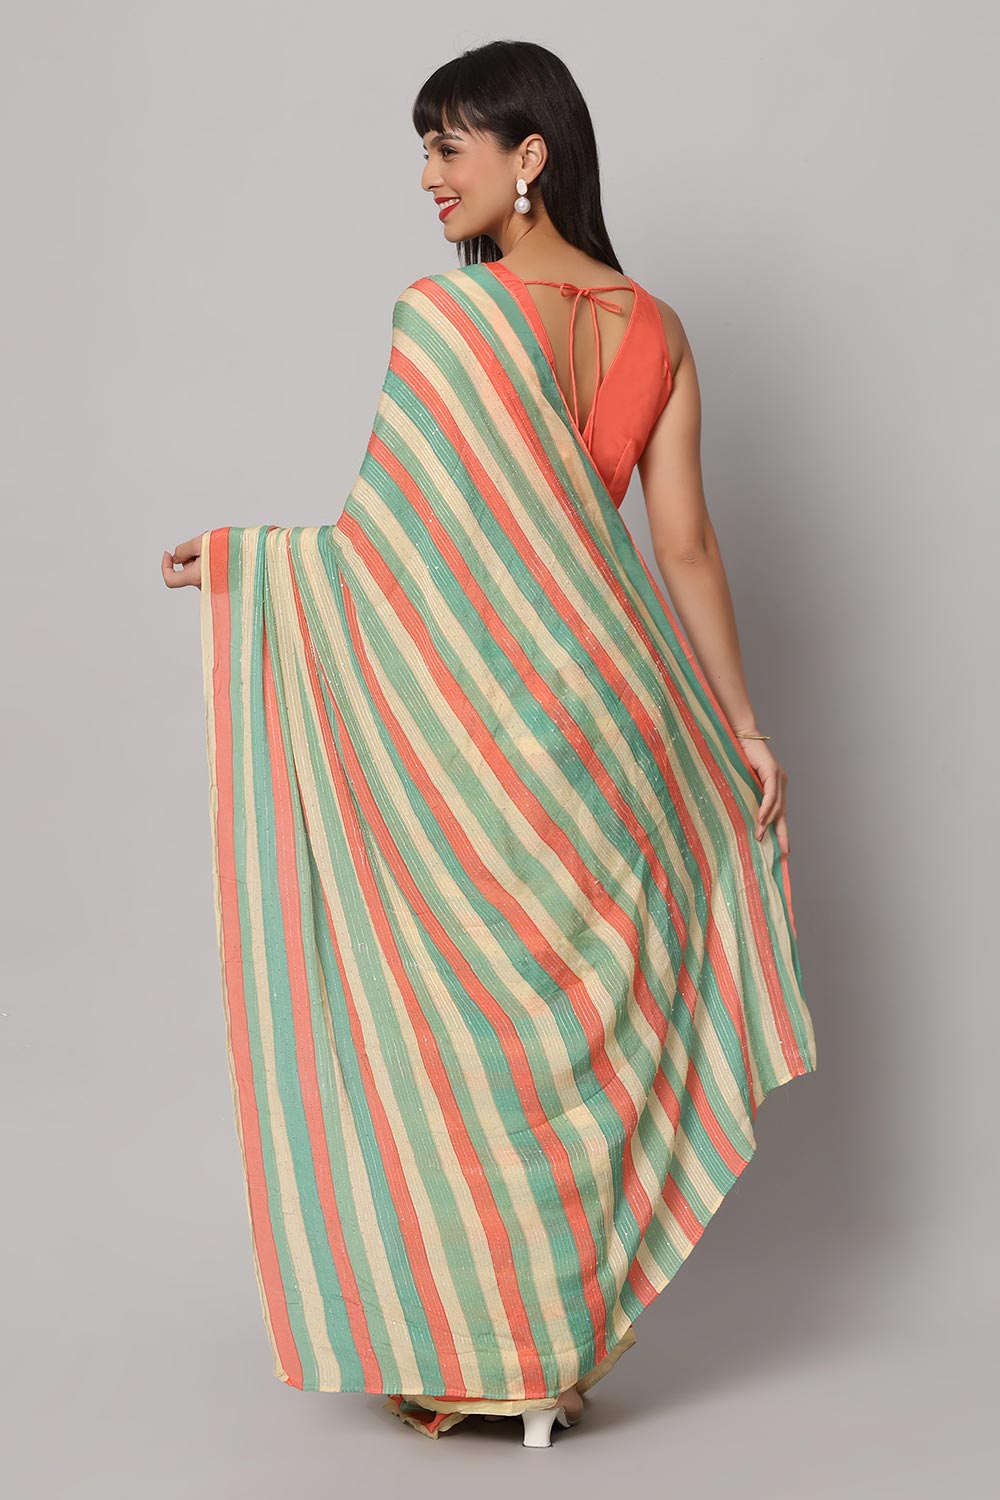 Shop Jini Multi-colored Striped Georgette with Sequins One Minute Saree at best offer at our  Store - One Minute Saree